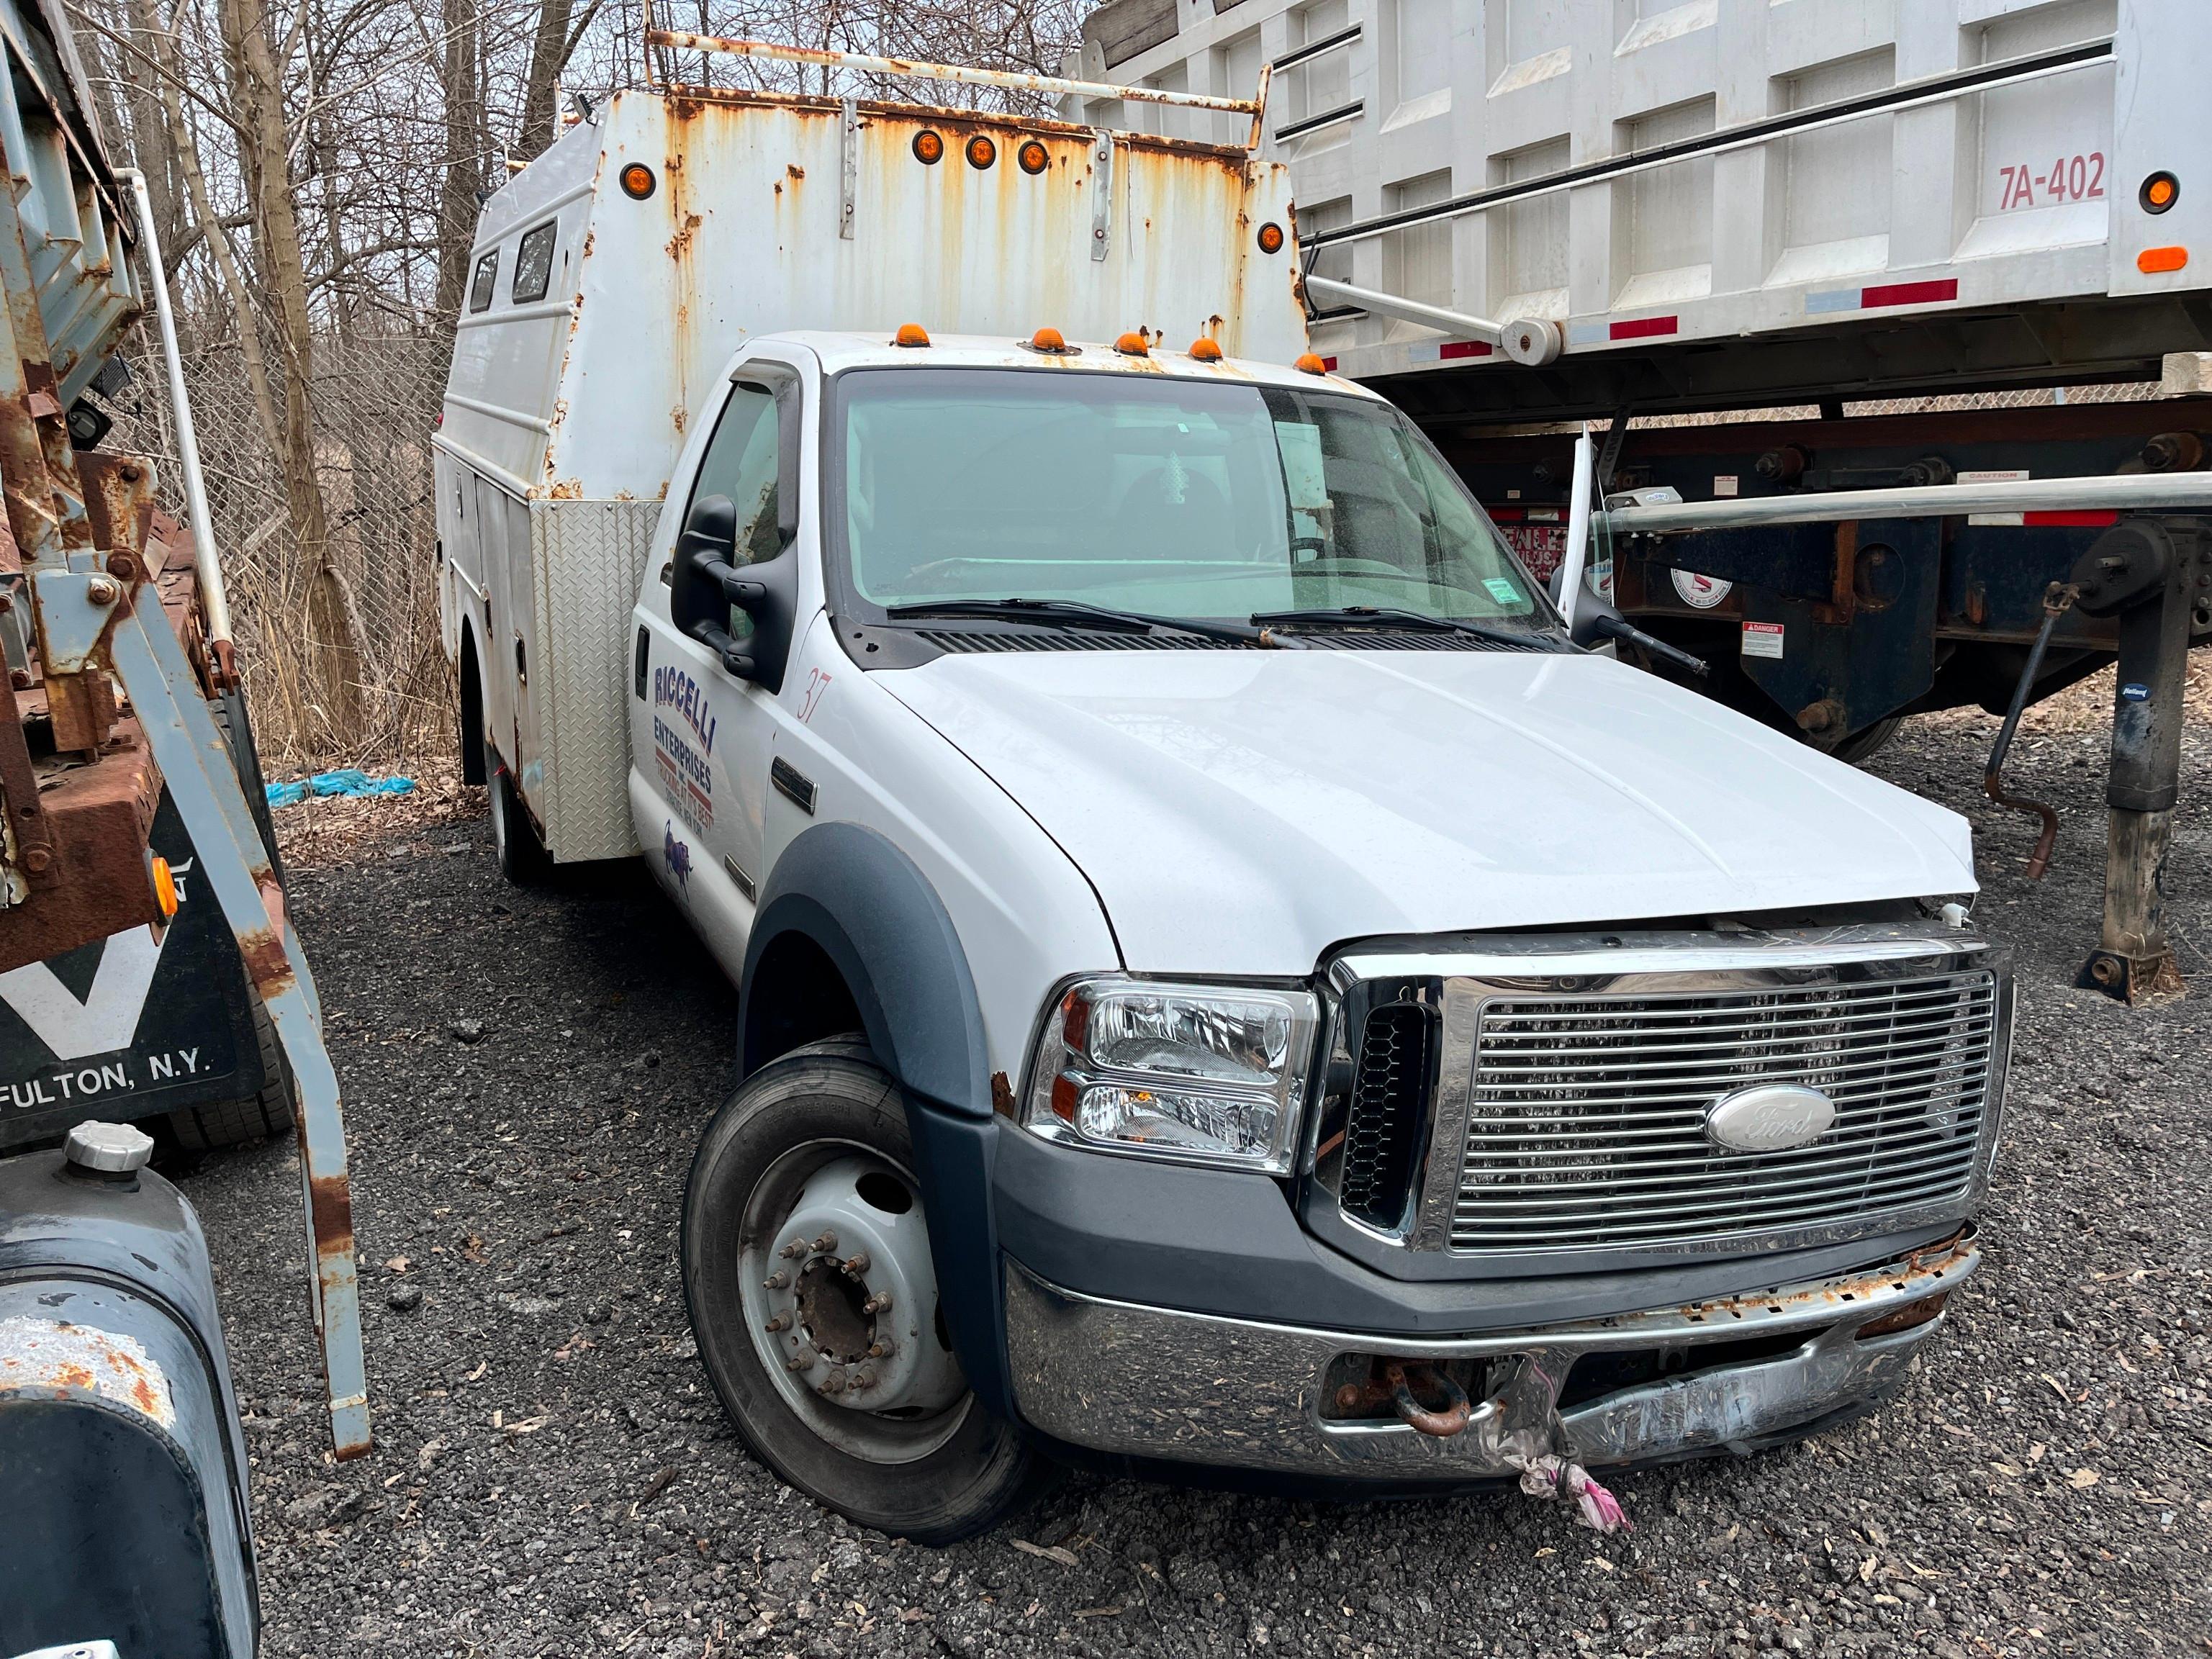 2007 FORD F550 SERVICE TRUCK VN:1FDAF56PX7EA89301 powered by 6.0 diesel engine, equipped with